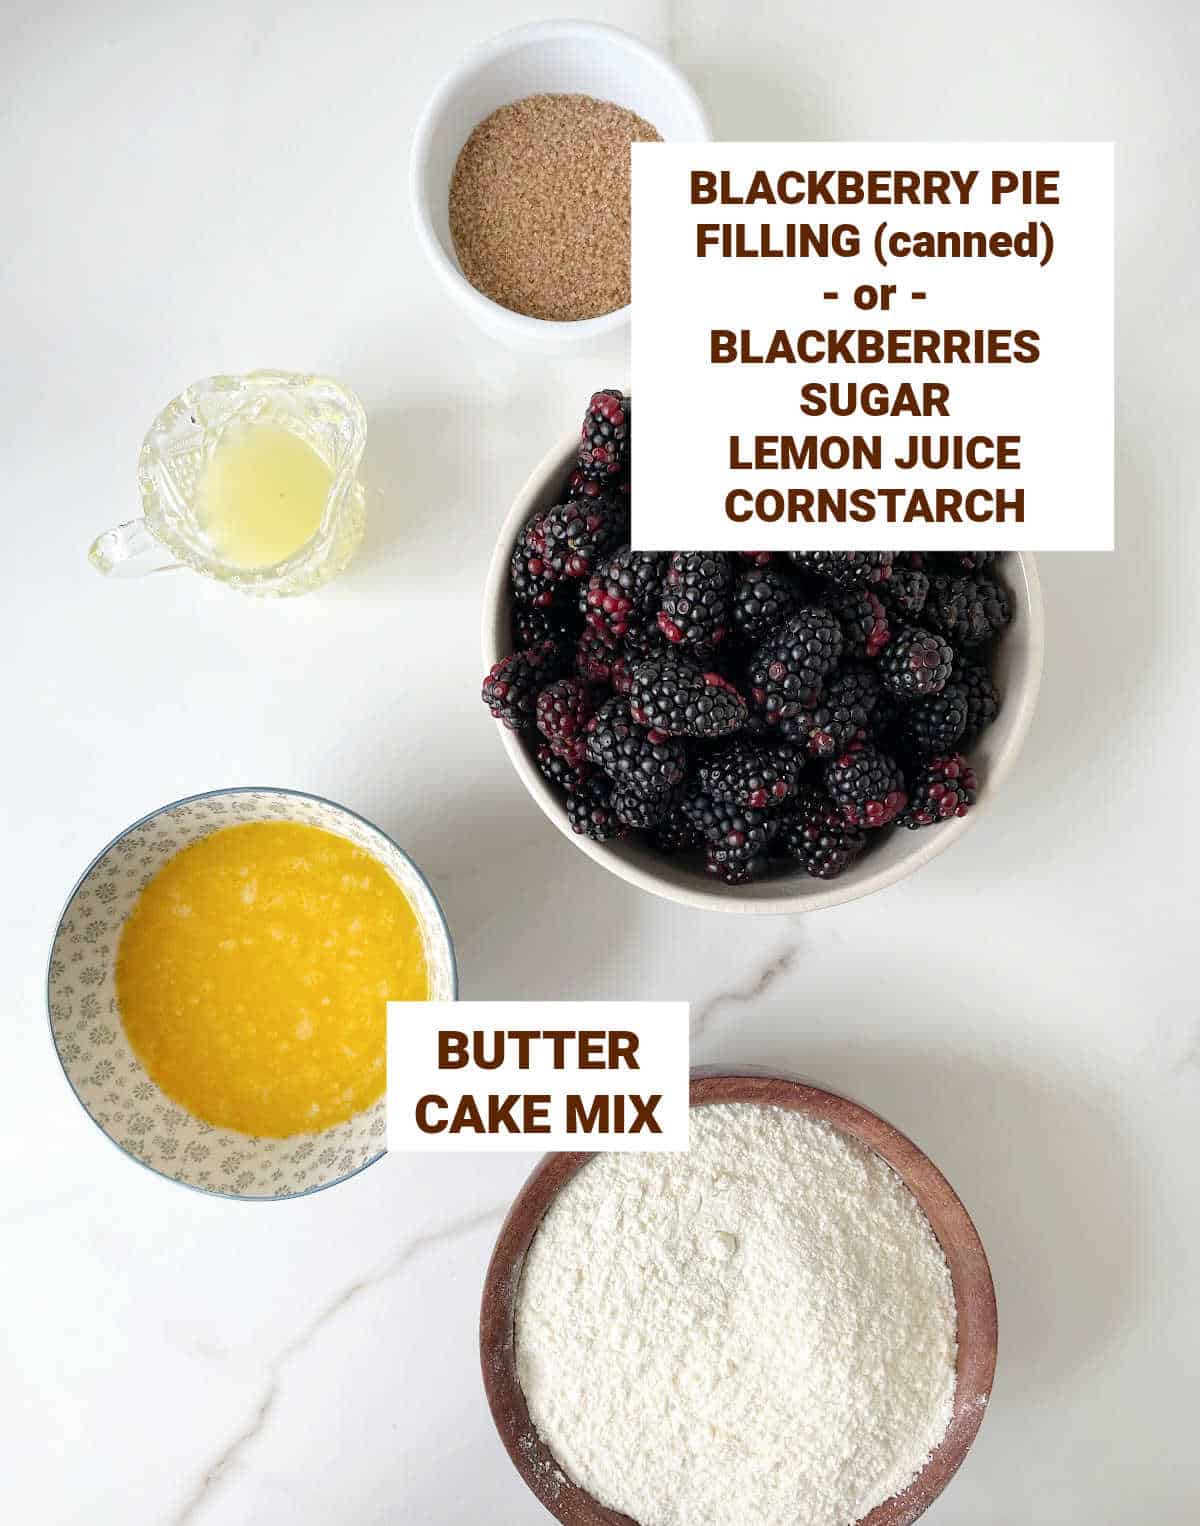 White marble surface with bowls containing ingredients for blackberry dump cake including butter, sugar, lemon juice, and cake mix.